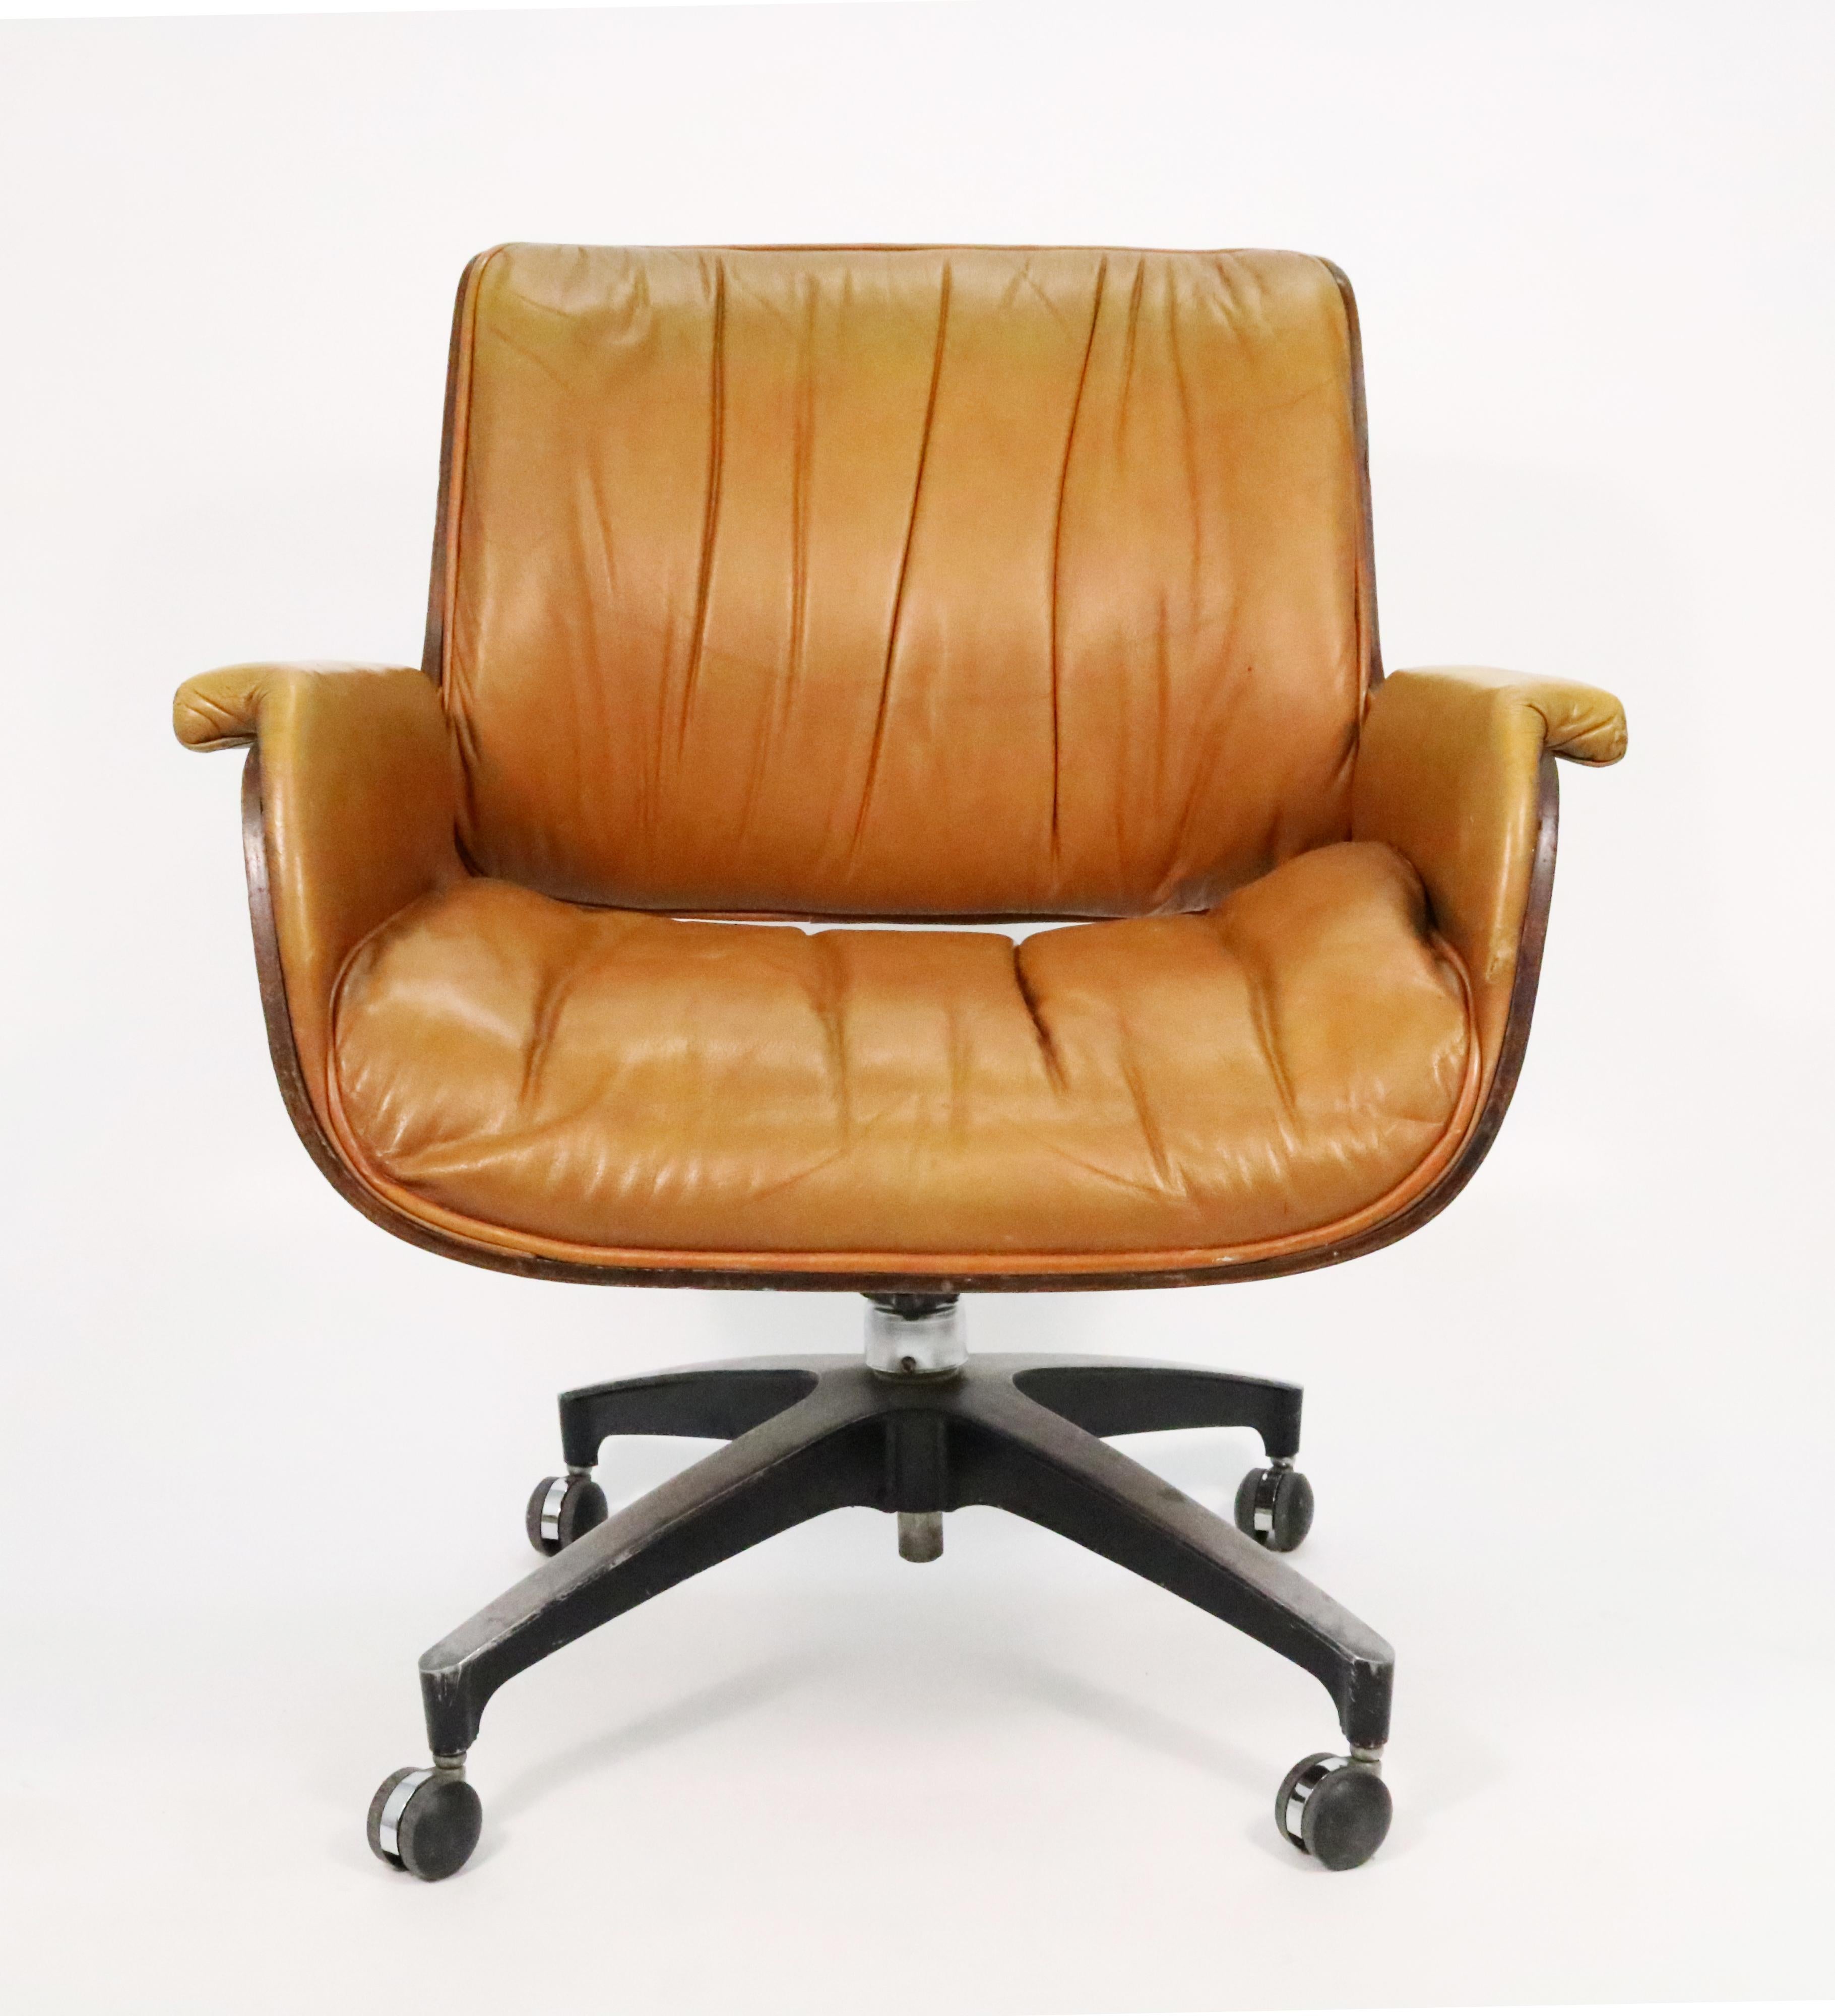 A rare, limited-production executive desk chair by George Mulhauser for his 